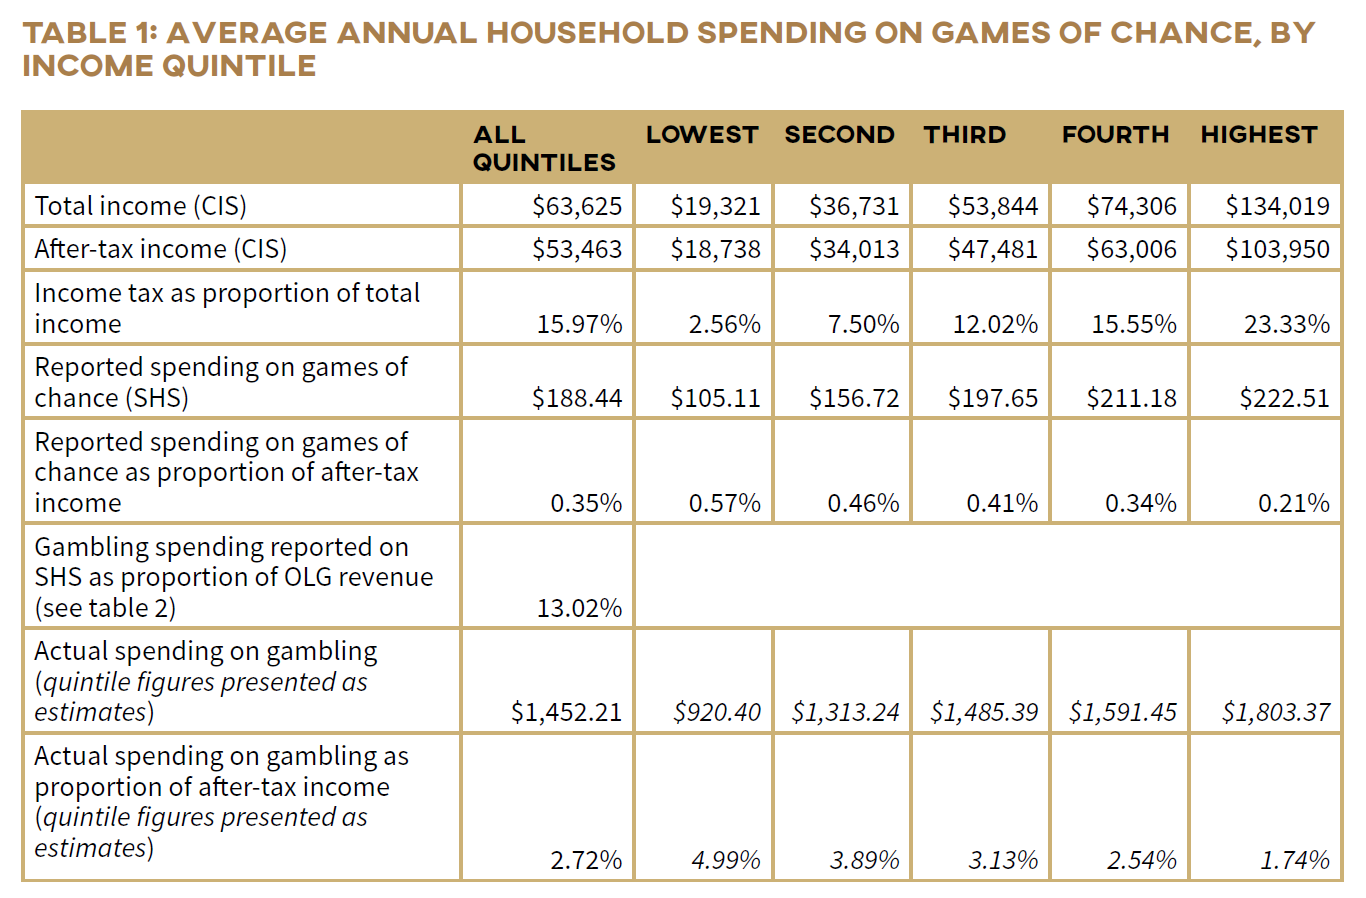 Table 1: Average Annual household spending on games of chance by income quintile